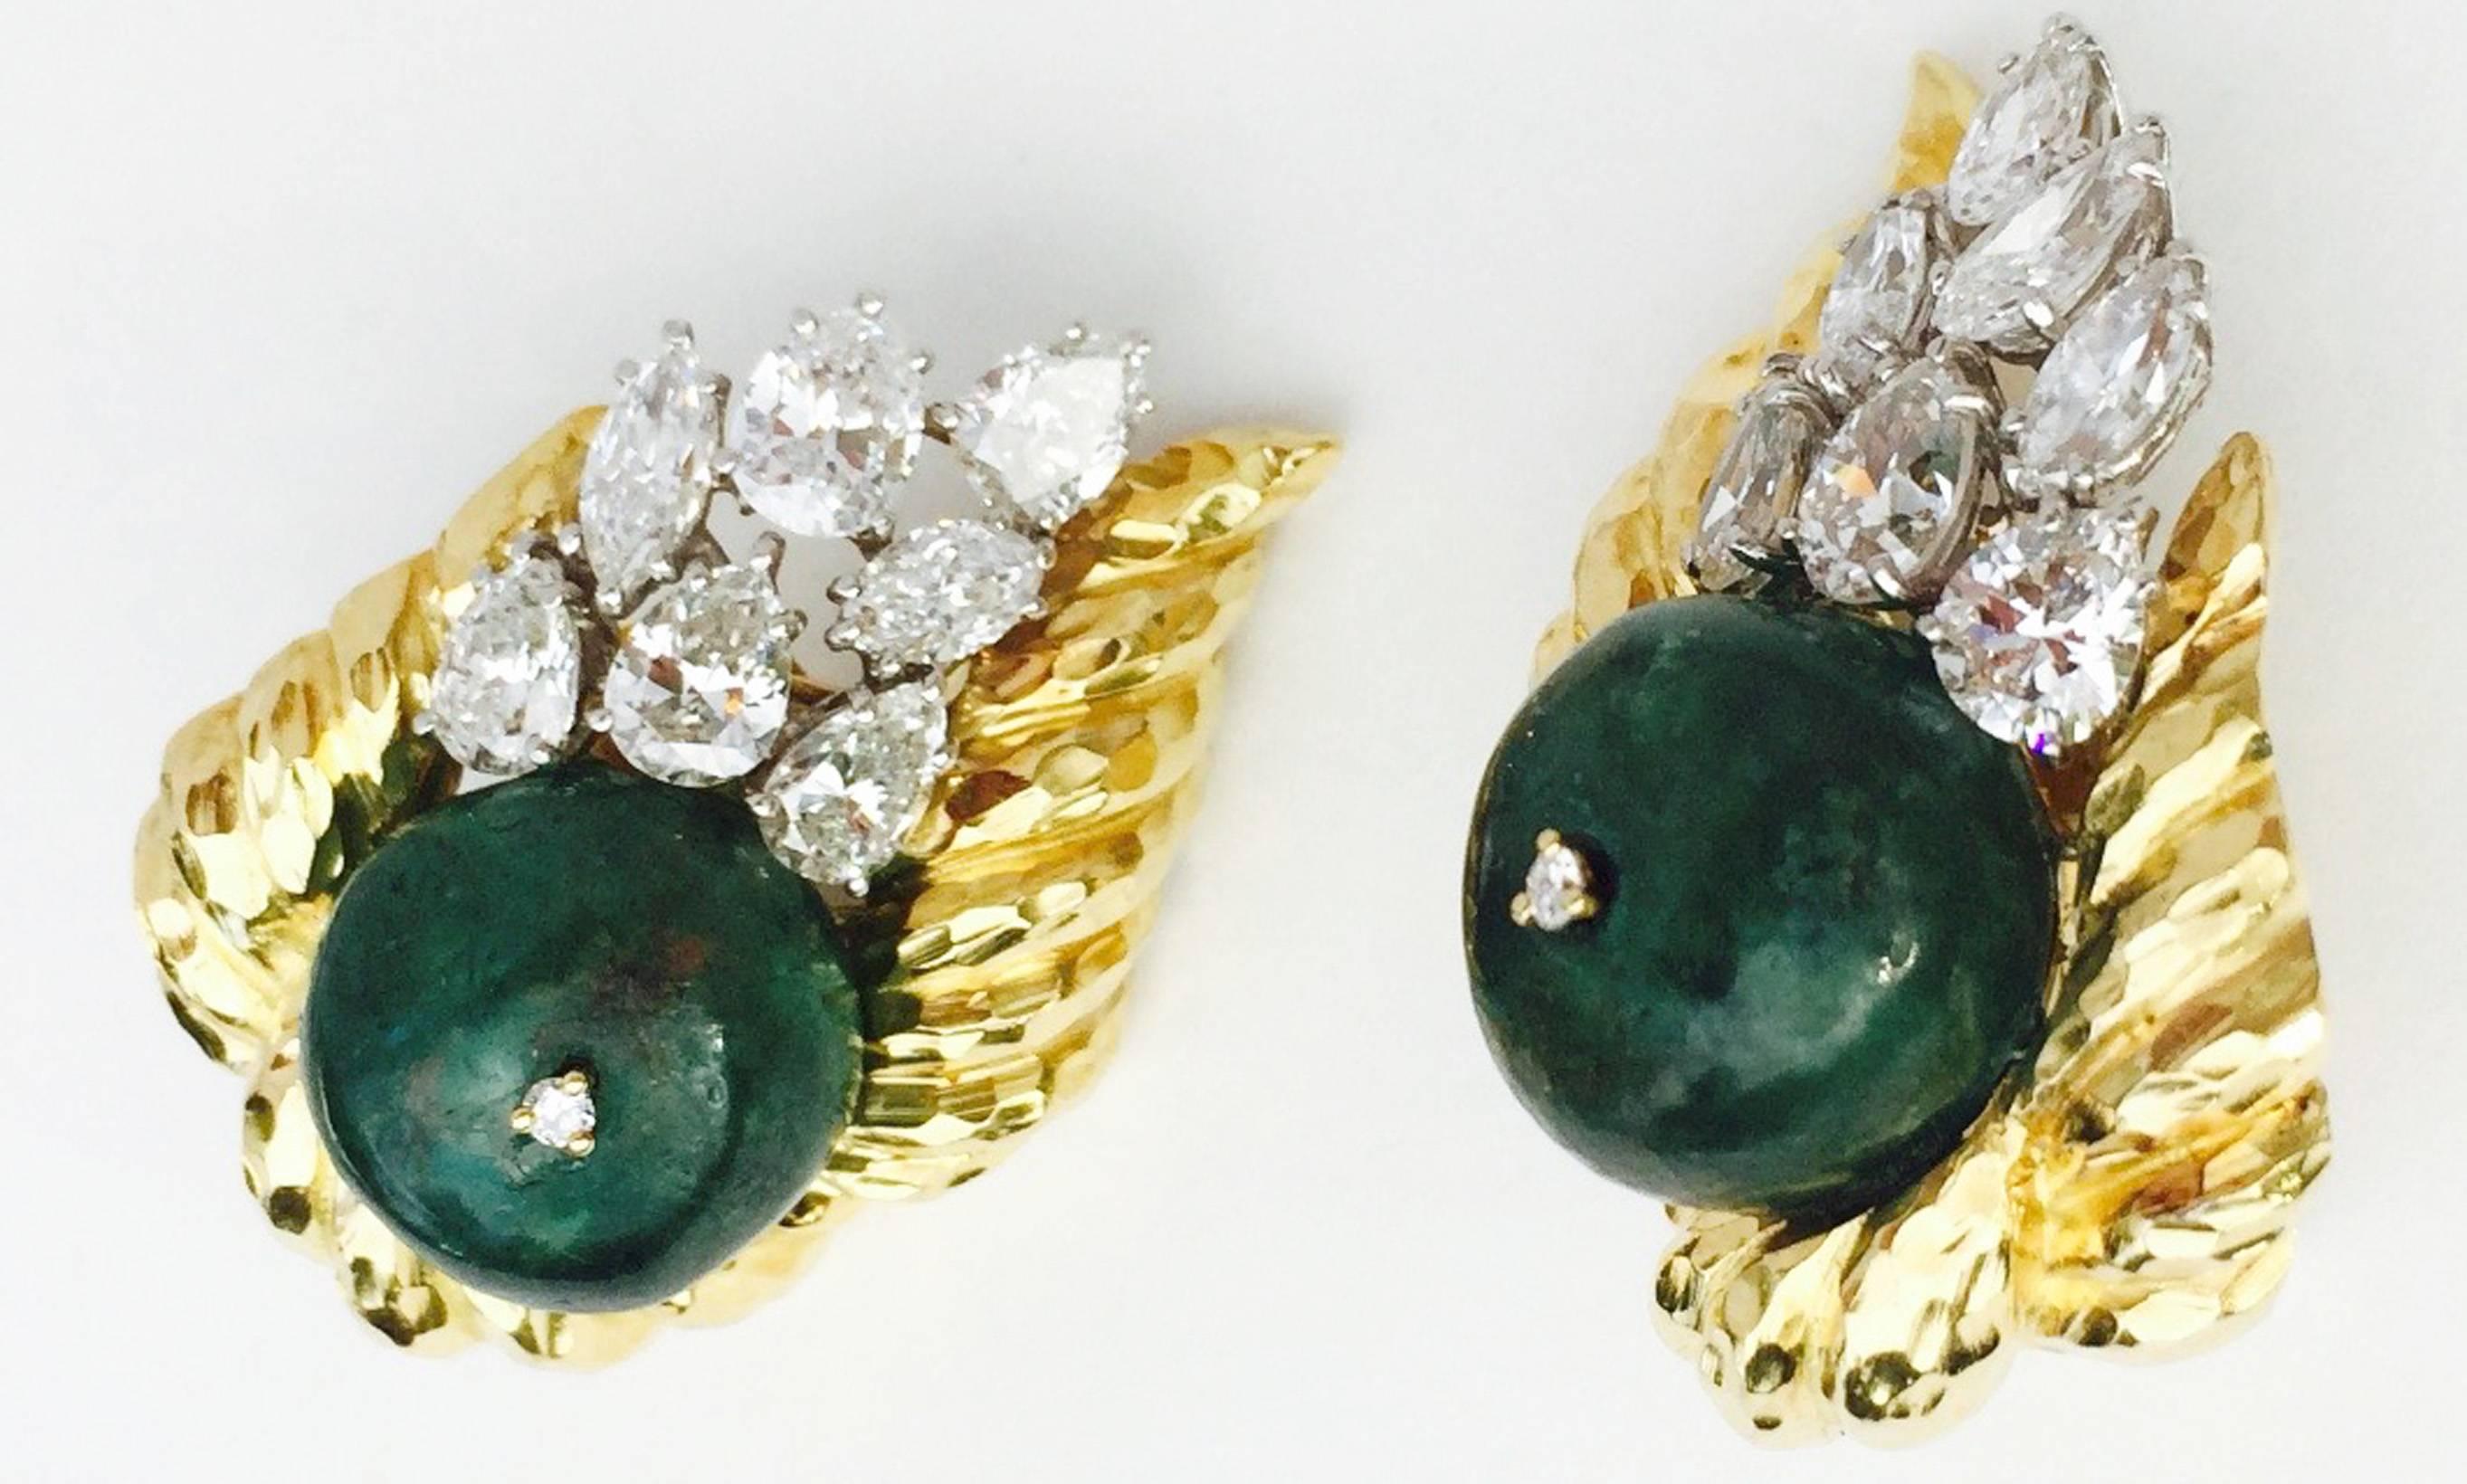 A exquisite pair David Webb emerald and diamond ear clips. Large signed hammered yellow gold items feature 15mm cabochon emerald bead centers (approx. 20ct. each) sprinkled with sparkling pear and marquise diamonds (approx. 10ctw). Outstanding